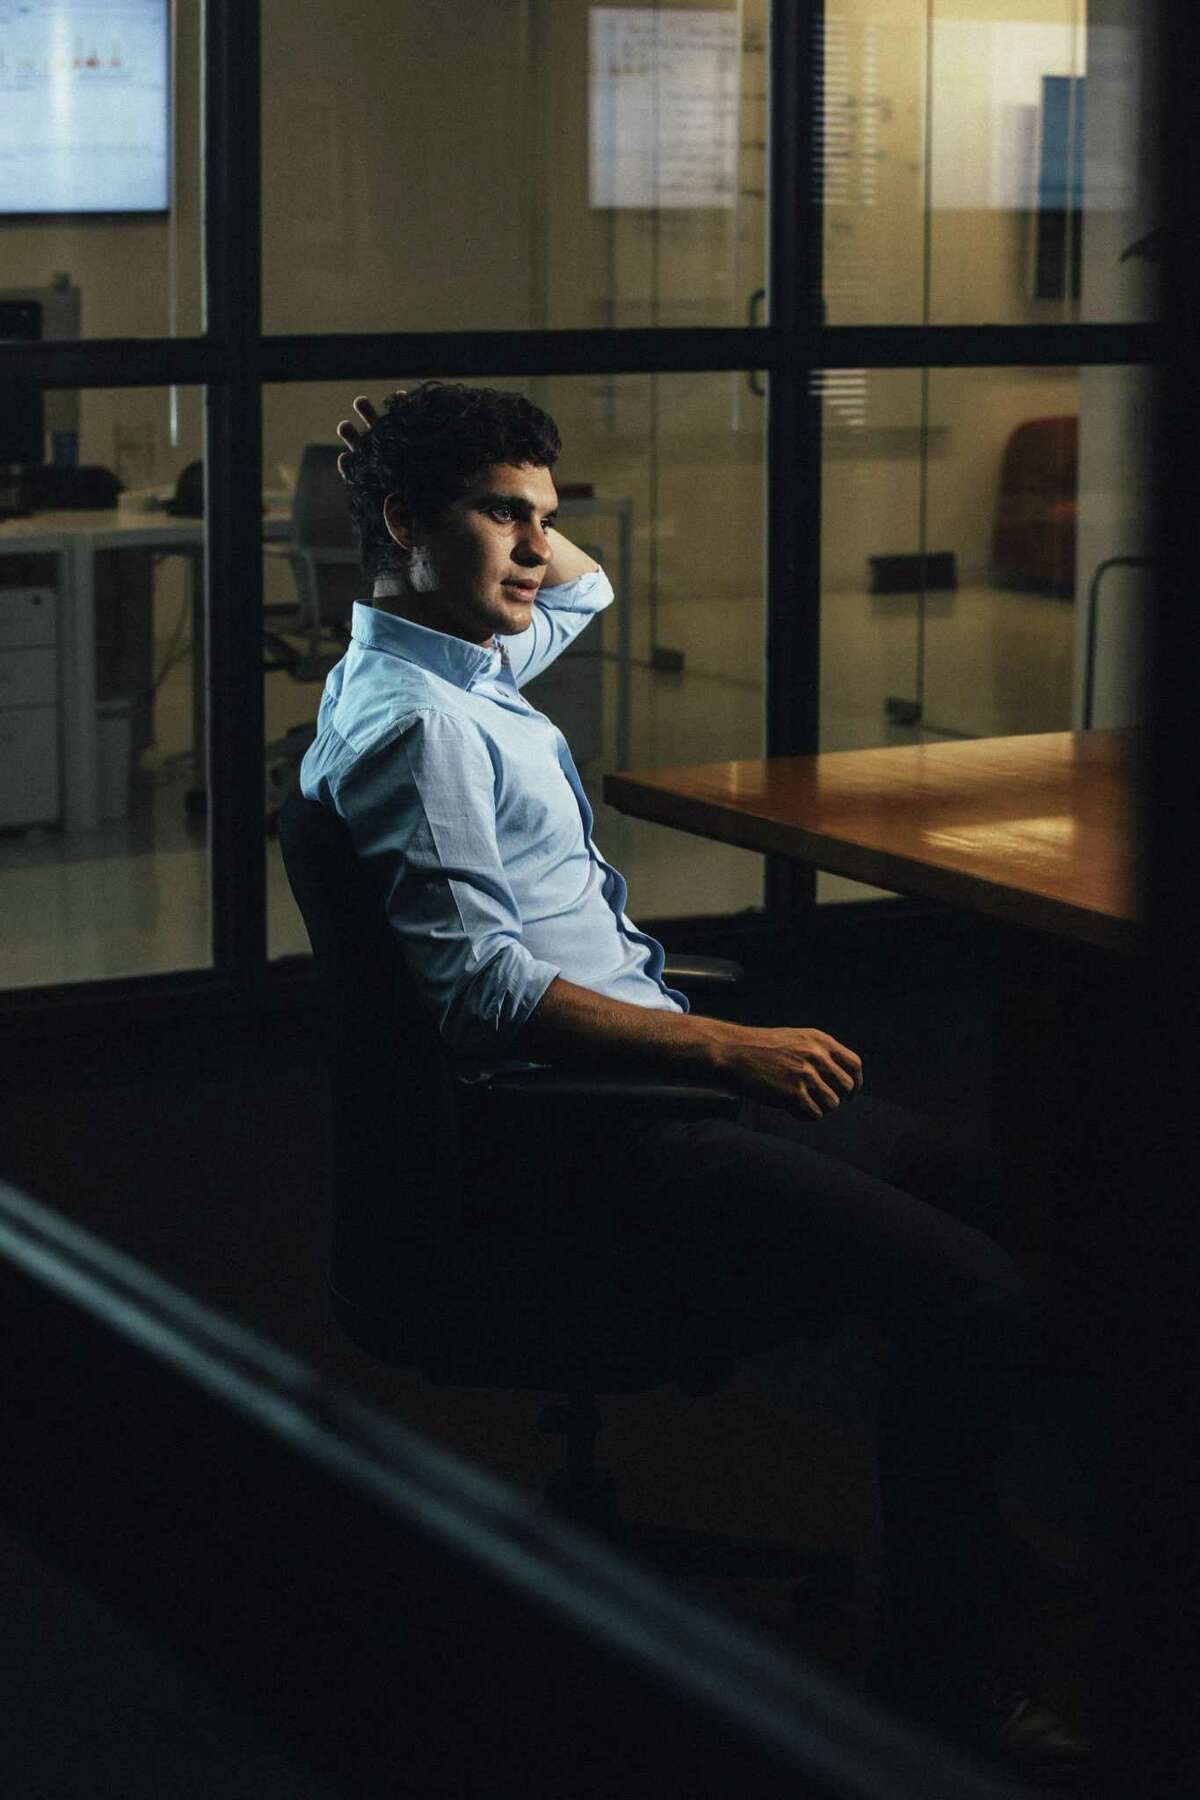 Gus Wenner, the 27-year-old president and chief operating officer of Wenner Media, the parent company of Rolling Stone magazine, at his office in New York, Sept. 14, 2017. In response to the financial downturn facing the entire publishing industry, Wenner Media has sold off its assets, including Us Weekly and Mens Journal. Wenner said he hoped to stay on at Rolling Stone under a new owner, but its sale would likely conclude the Wenners reign.